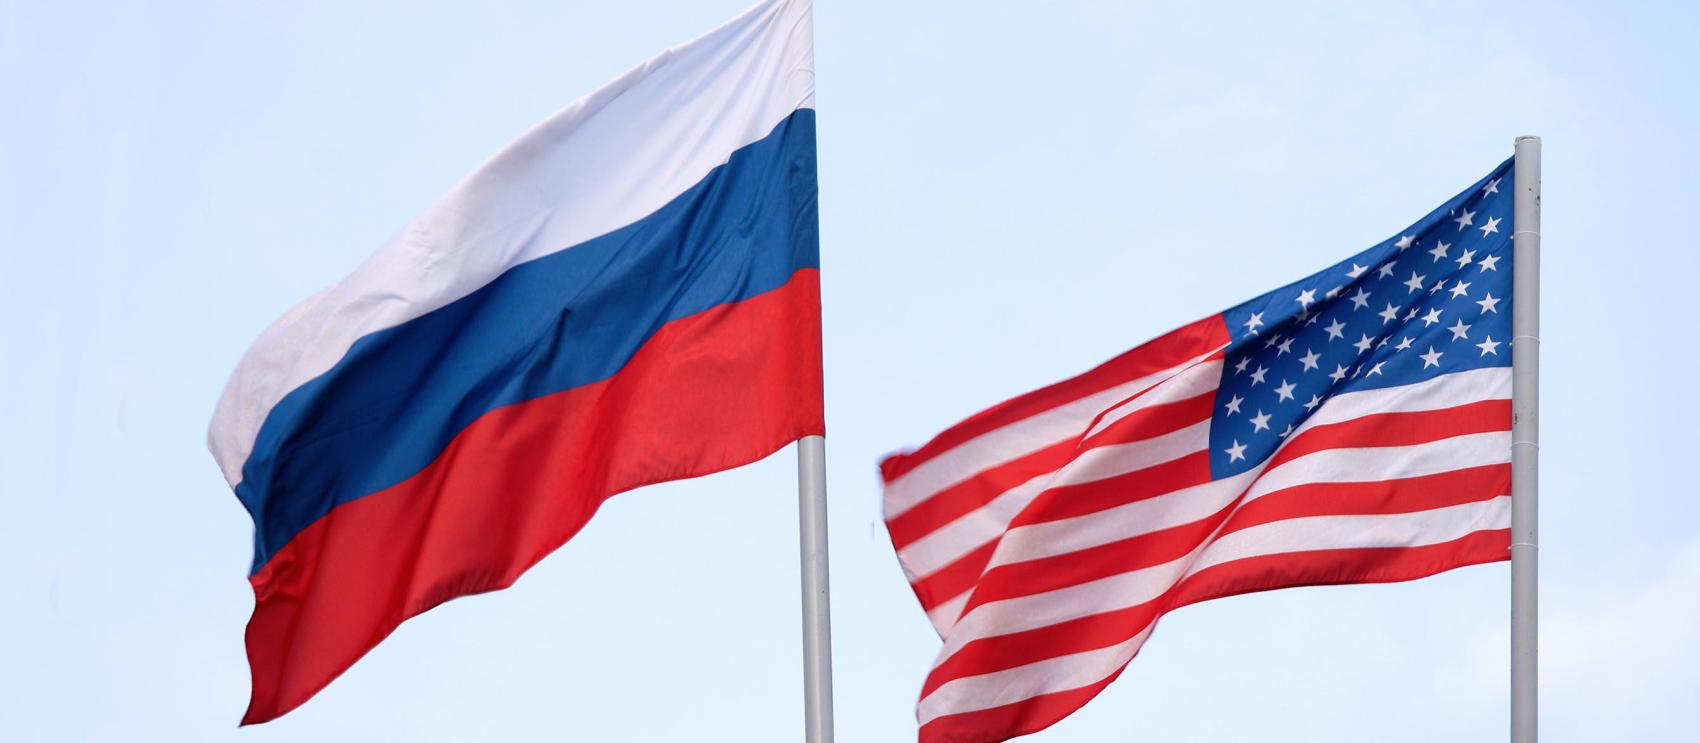 Russian and U.S. flags